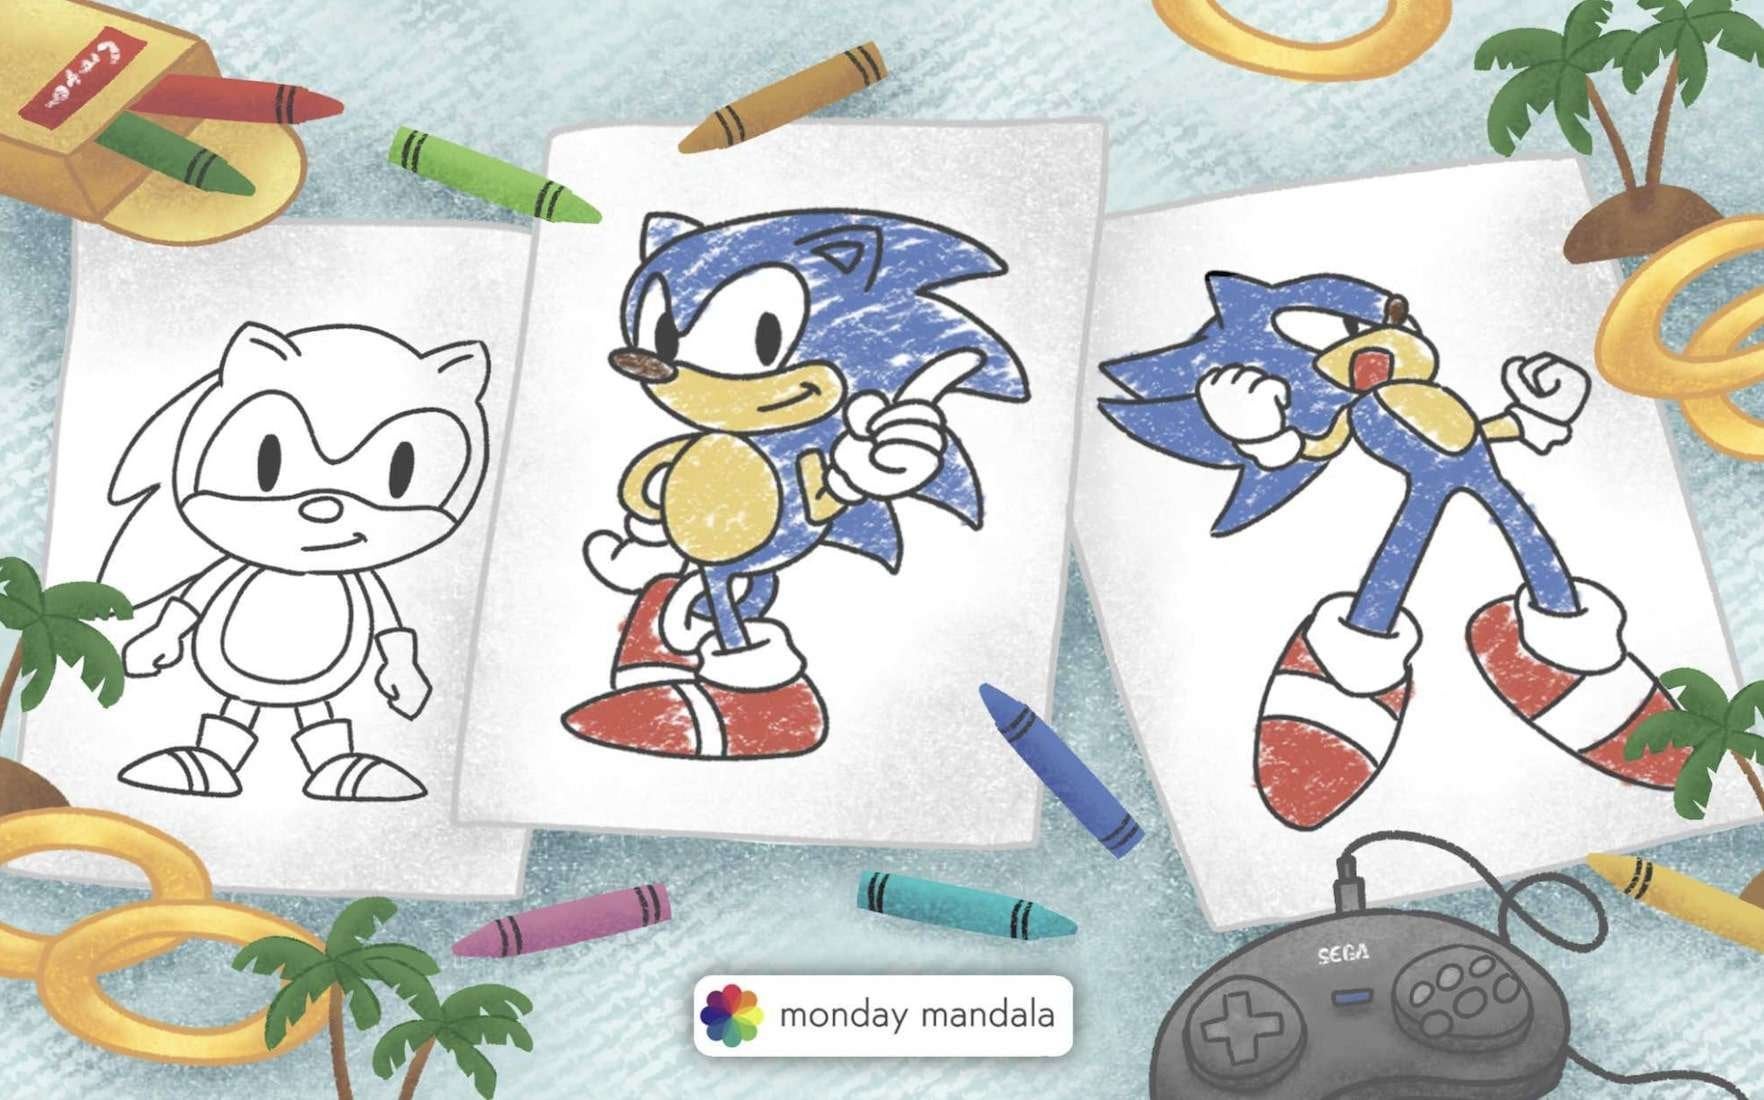 I illustrated sonic coloring pages that are free to printdownload please be gentle ð rsonicthehedgehog